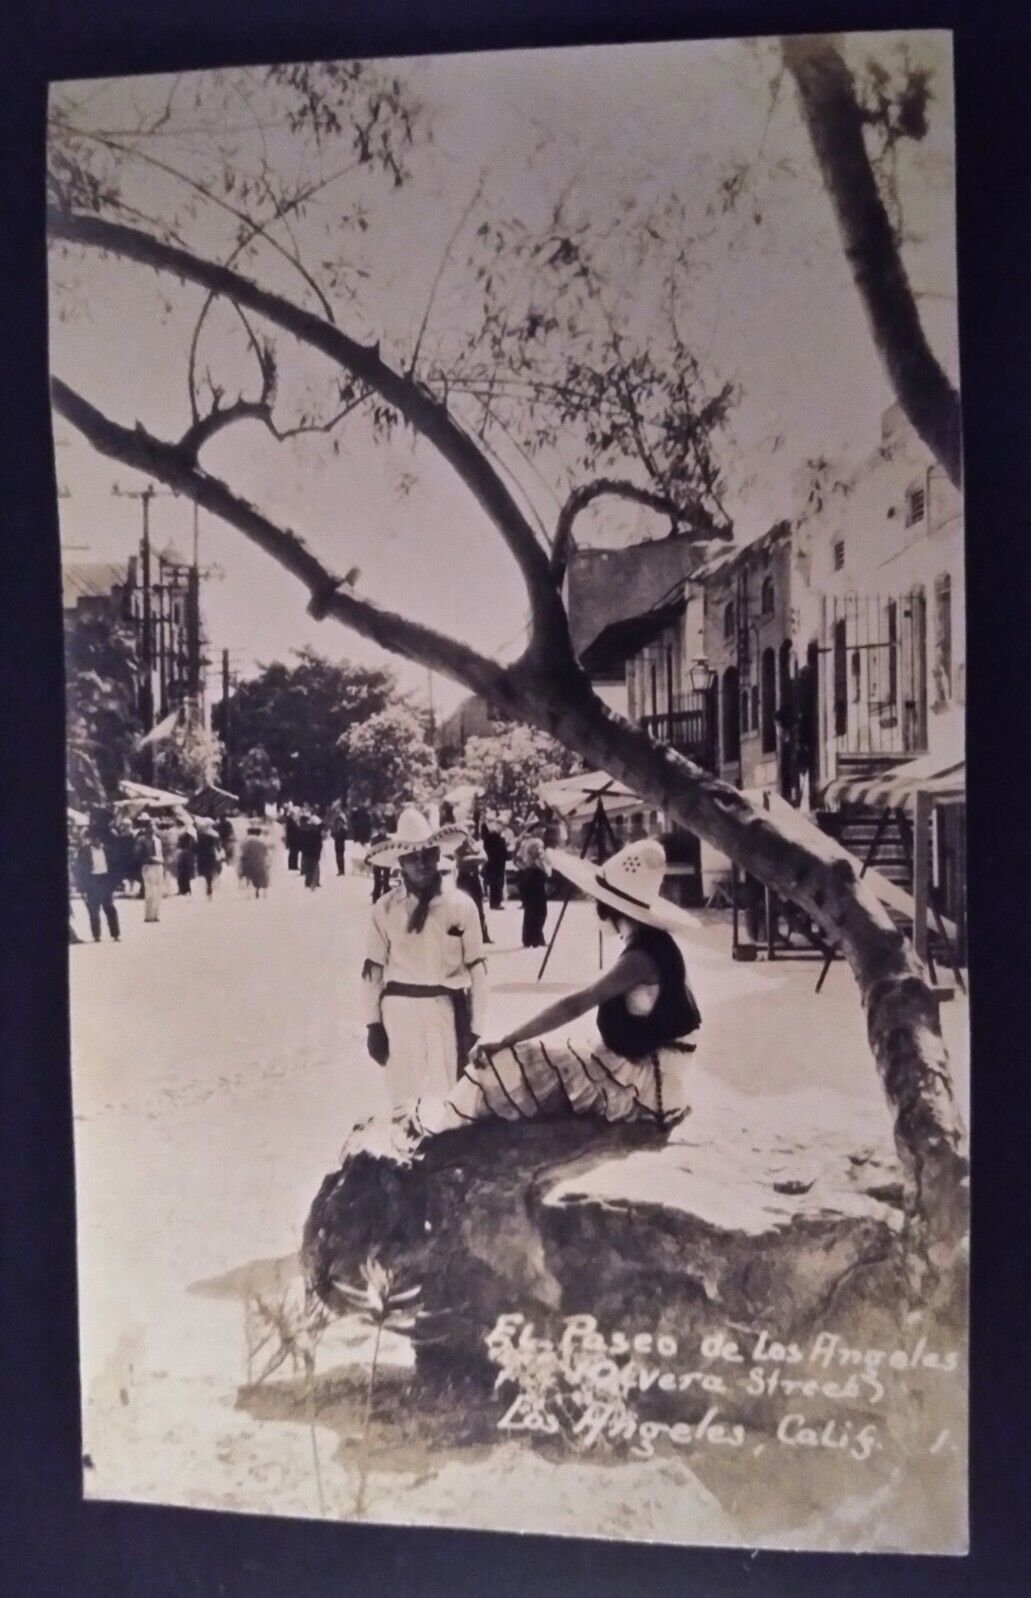  RPPC THE WALK LOS ANGELES CA  OLVERA ST 1918 SPANISH FLU WOMAN WITH FACE COVER.